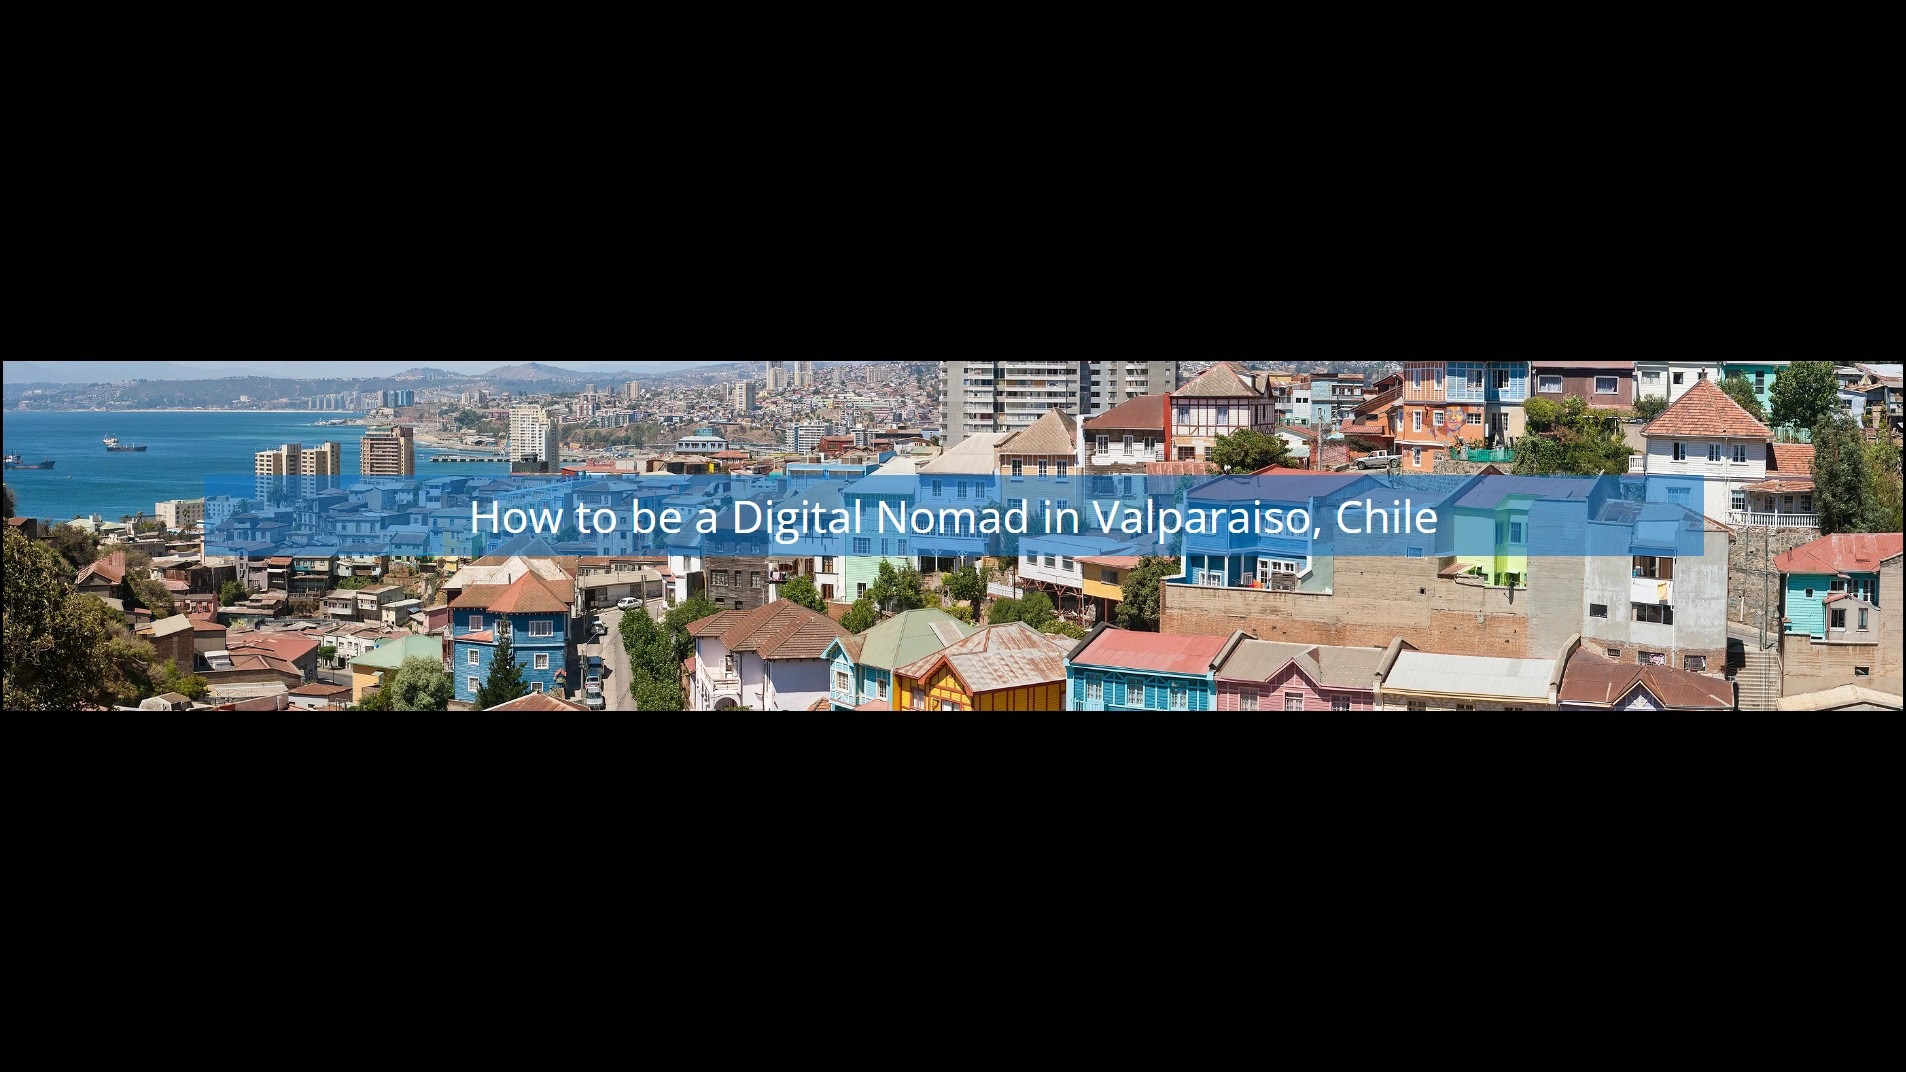 Laptop Lifestyle Travel Tips In Santiago, Chile | How To Be A Digital Nomad